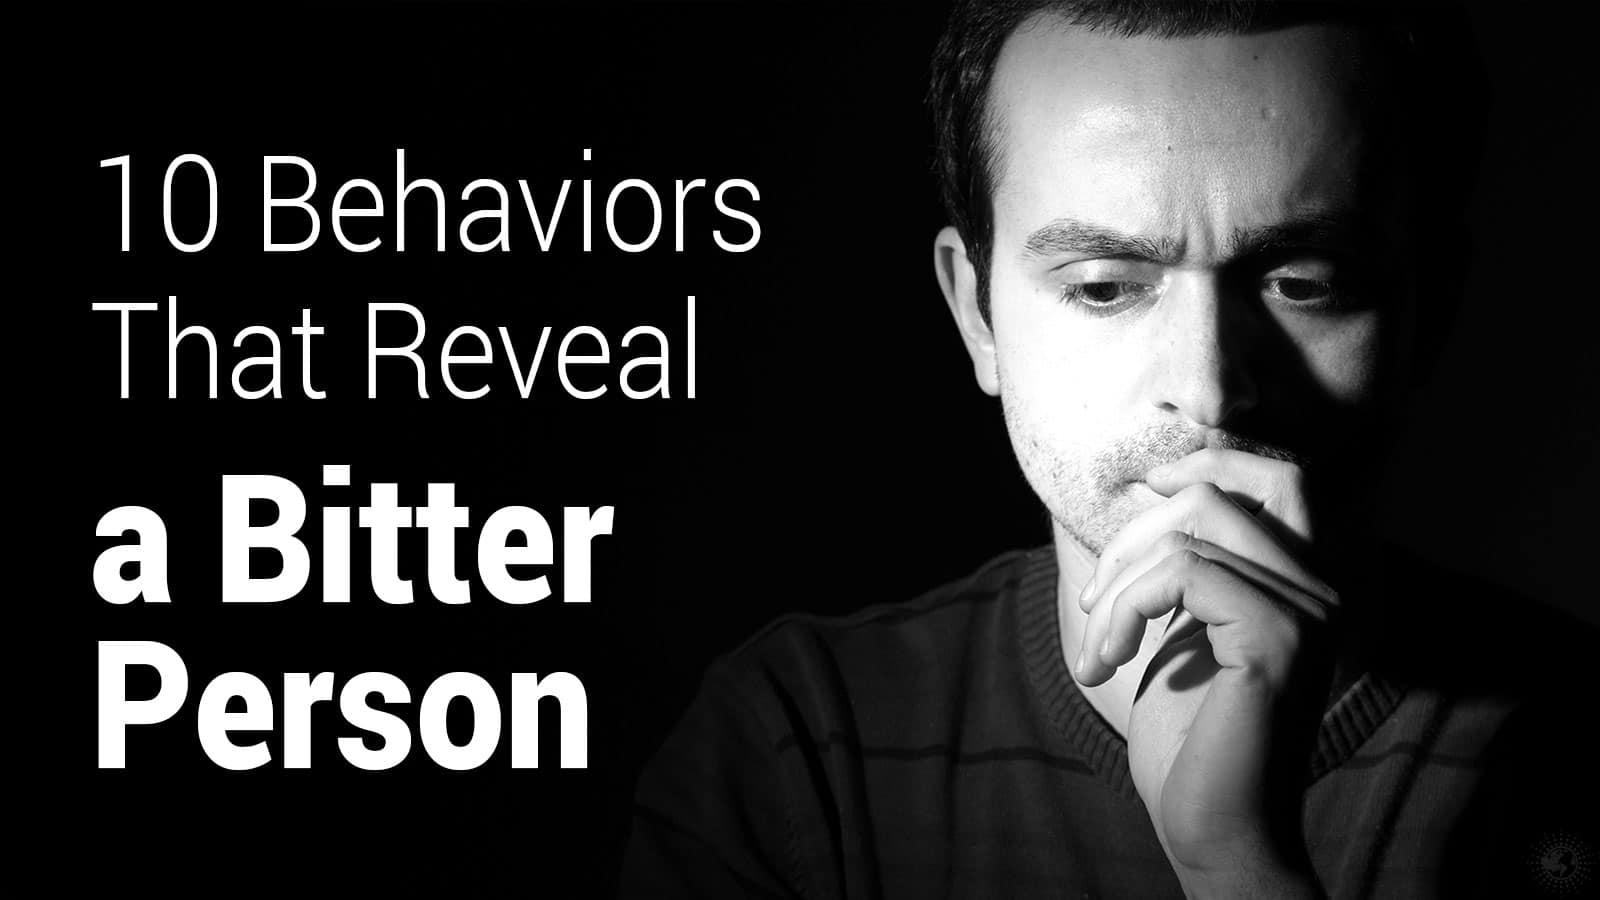 10 Behaviors That Reveal a Bitter Person